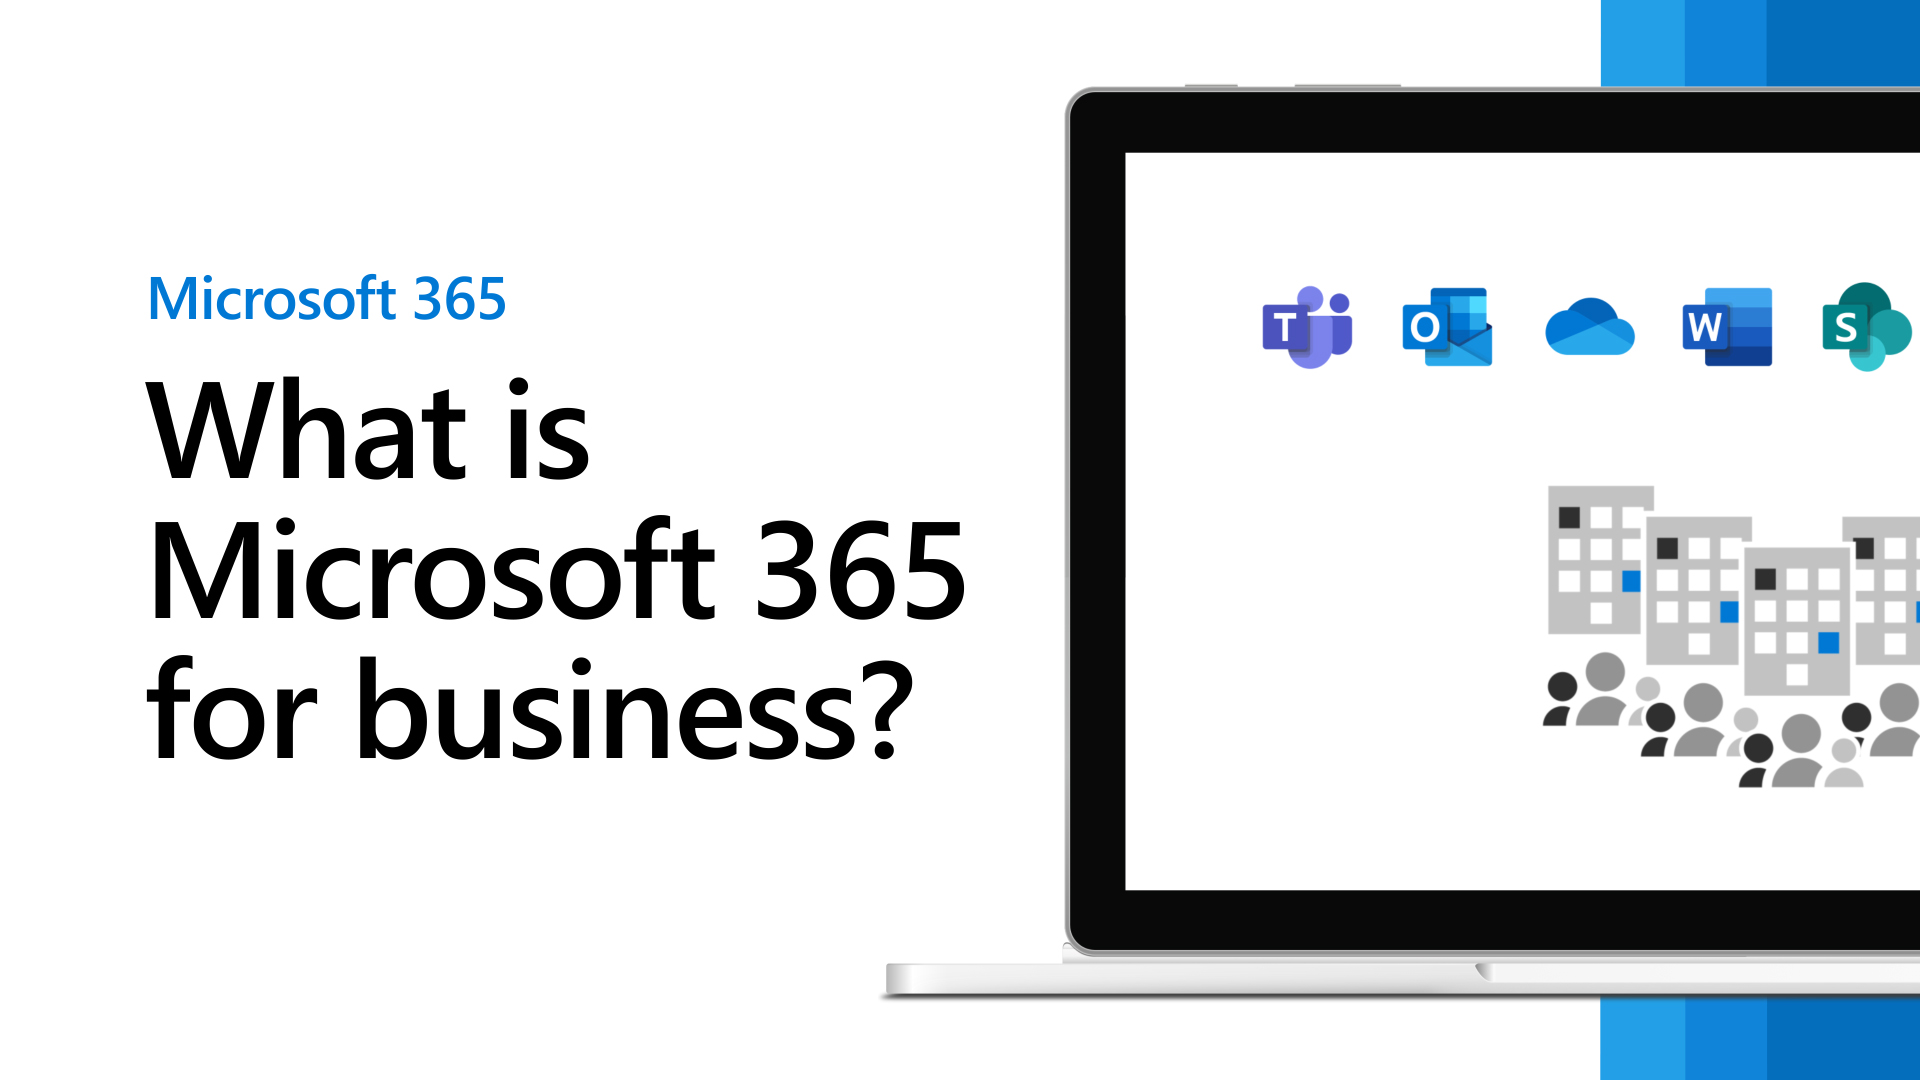 You How Microsoft 365 Can BE Intertwined Into Your Business